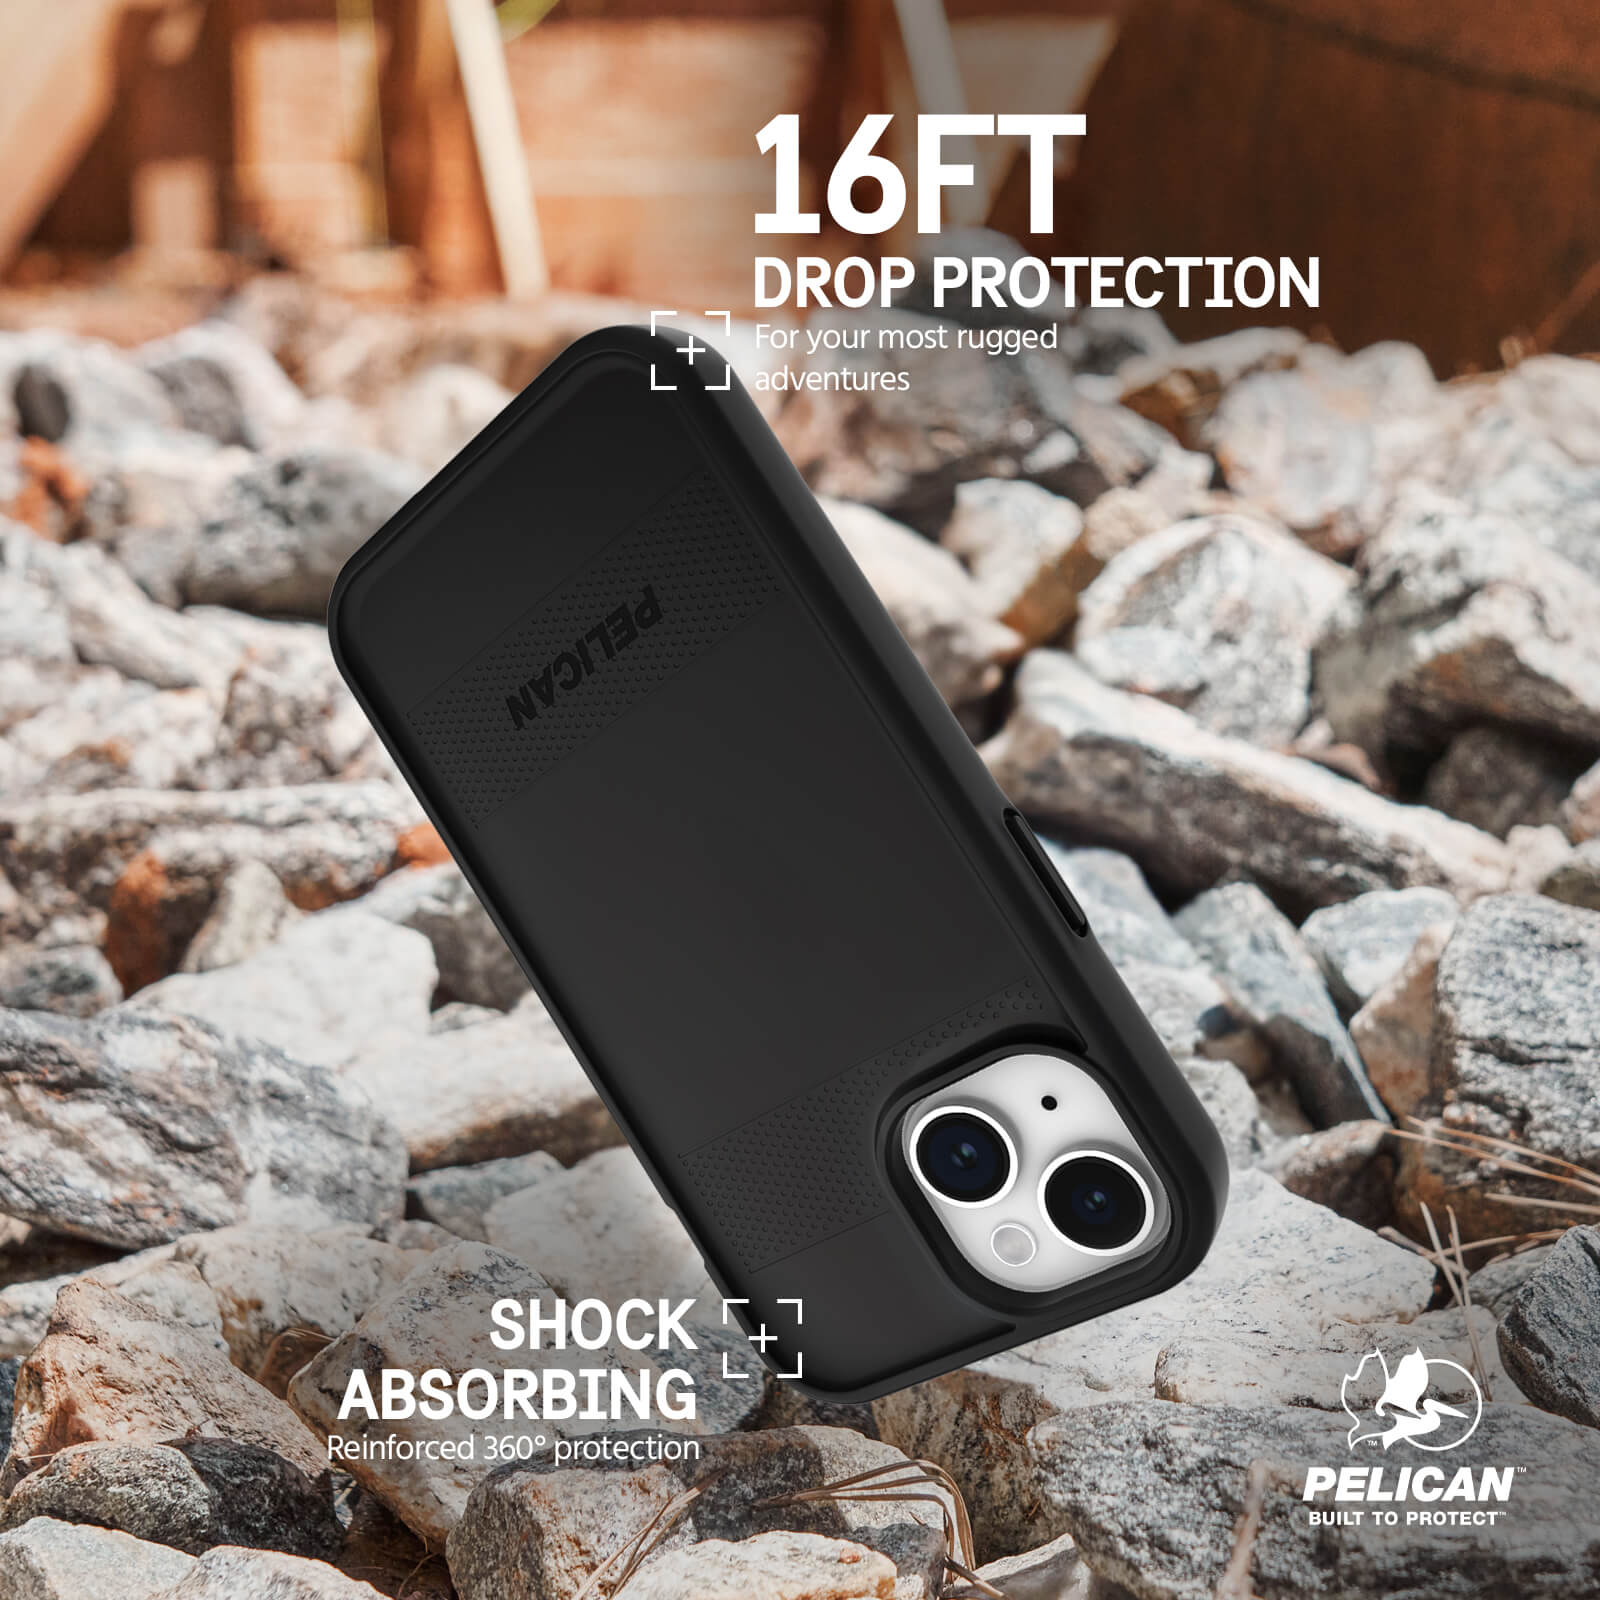 16FT DROP PROTECTION FOR YOUR MOST RUGGED ADVENTURES. SHOCK ABSORBING REINFORCED 360 DEGREE PROTECTION. 